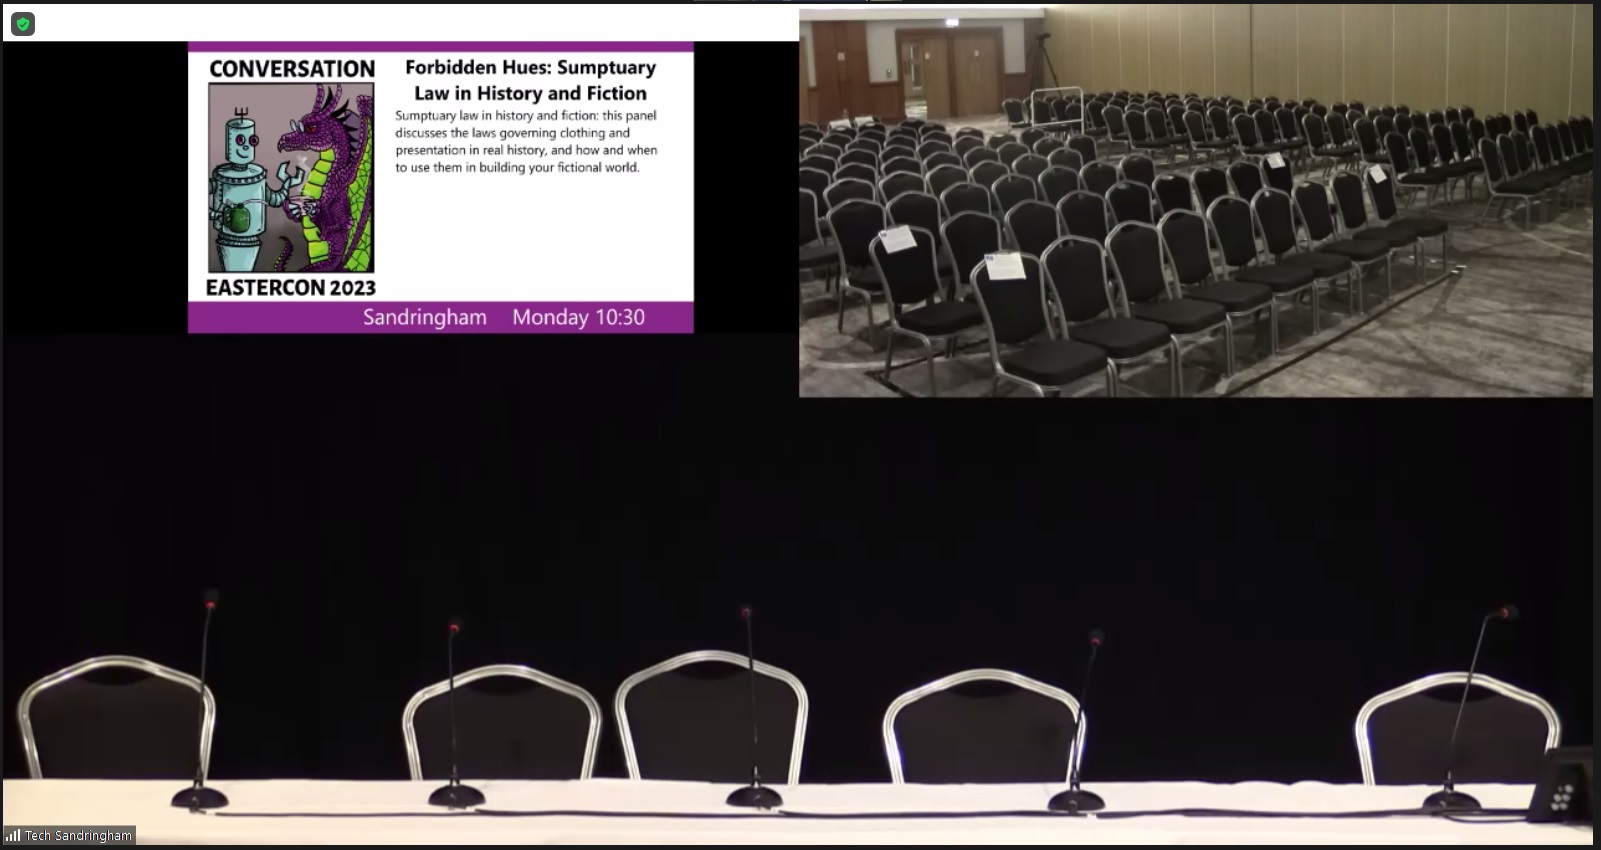 Picture shows a collage of three parts. Top left corner shows the convention logo and text about the programme item. Top right corner shows a mini feed from the empty conference room. Bottom is a close up at five chairs behind the speakers' table.